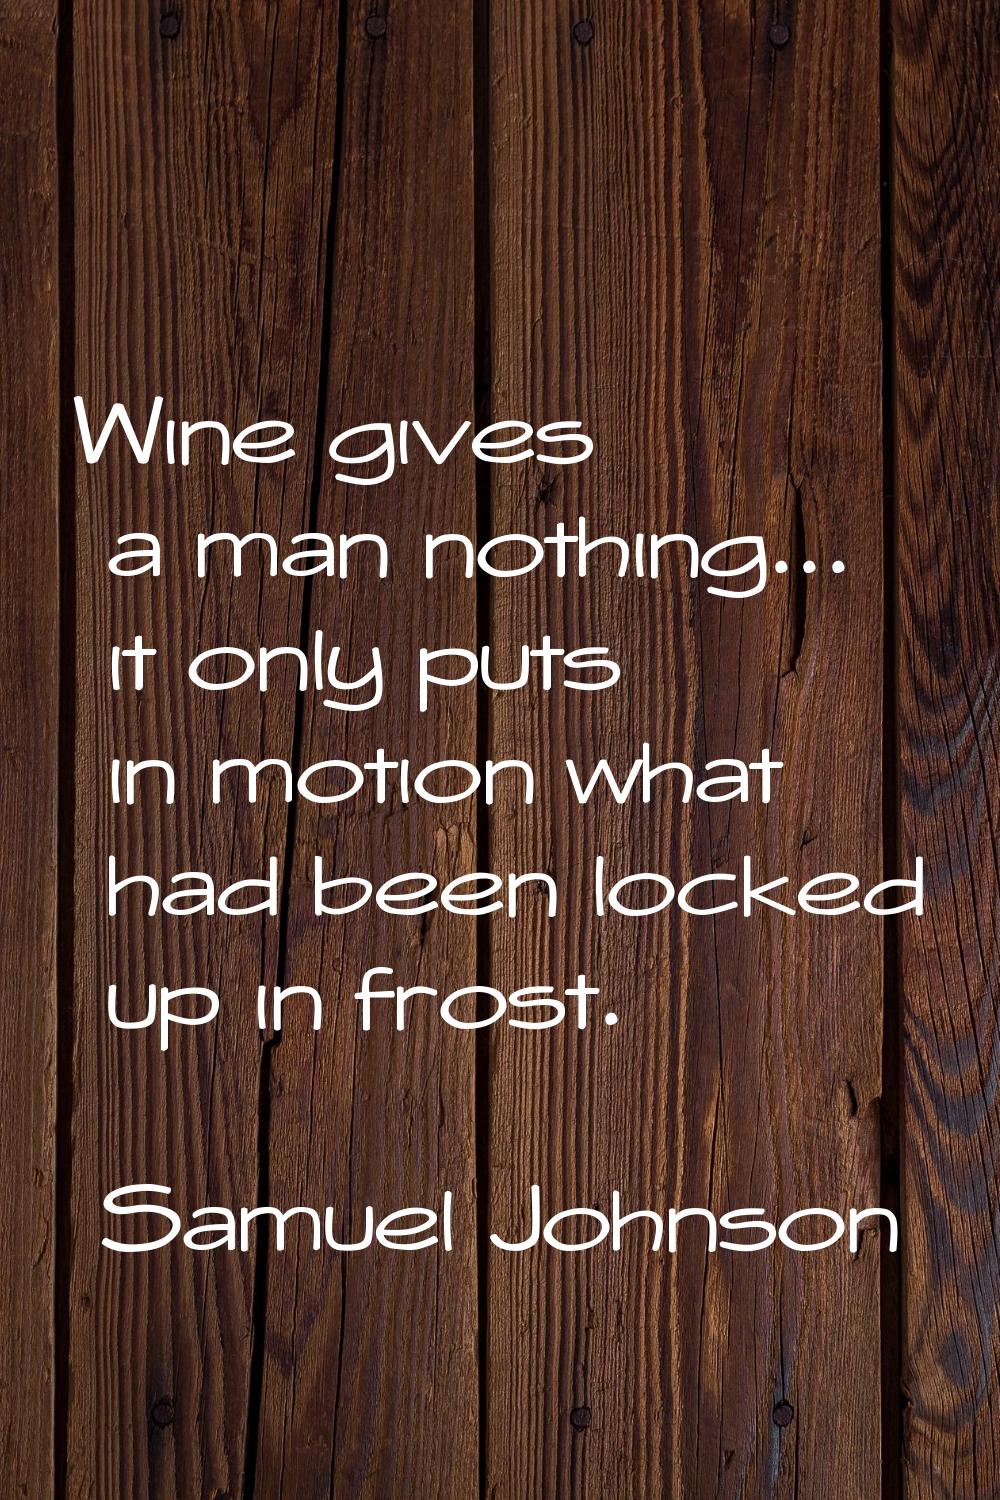 Wine gives a man nothing... it only puts in motion what had been locked up in frost.